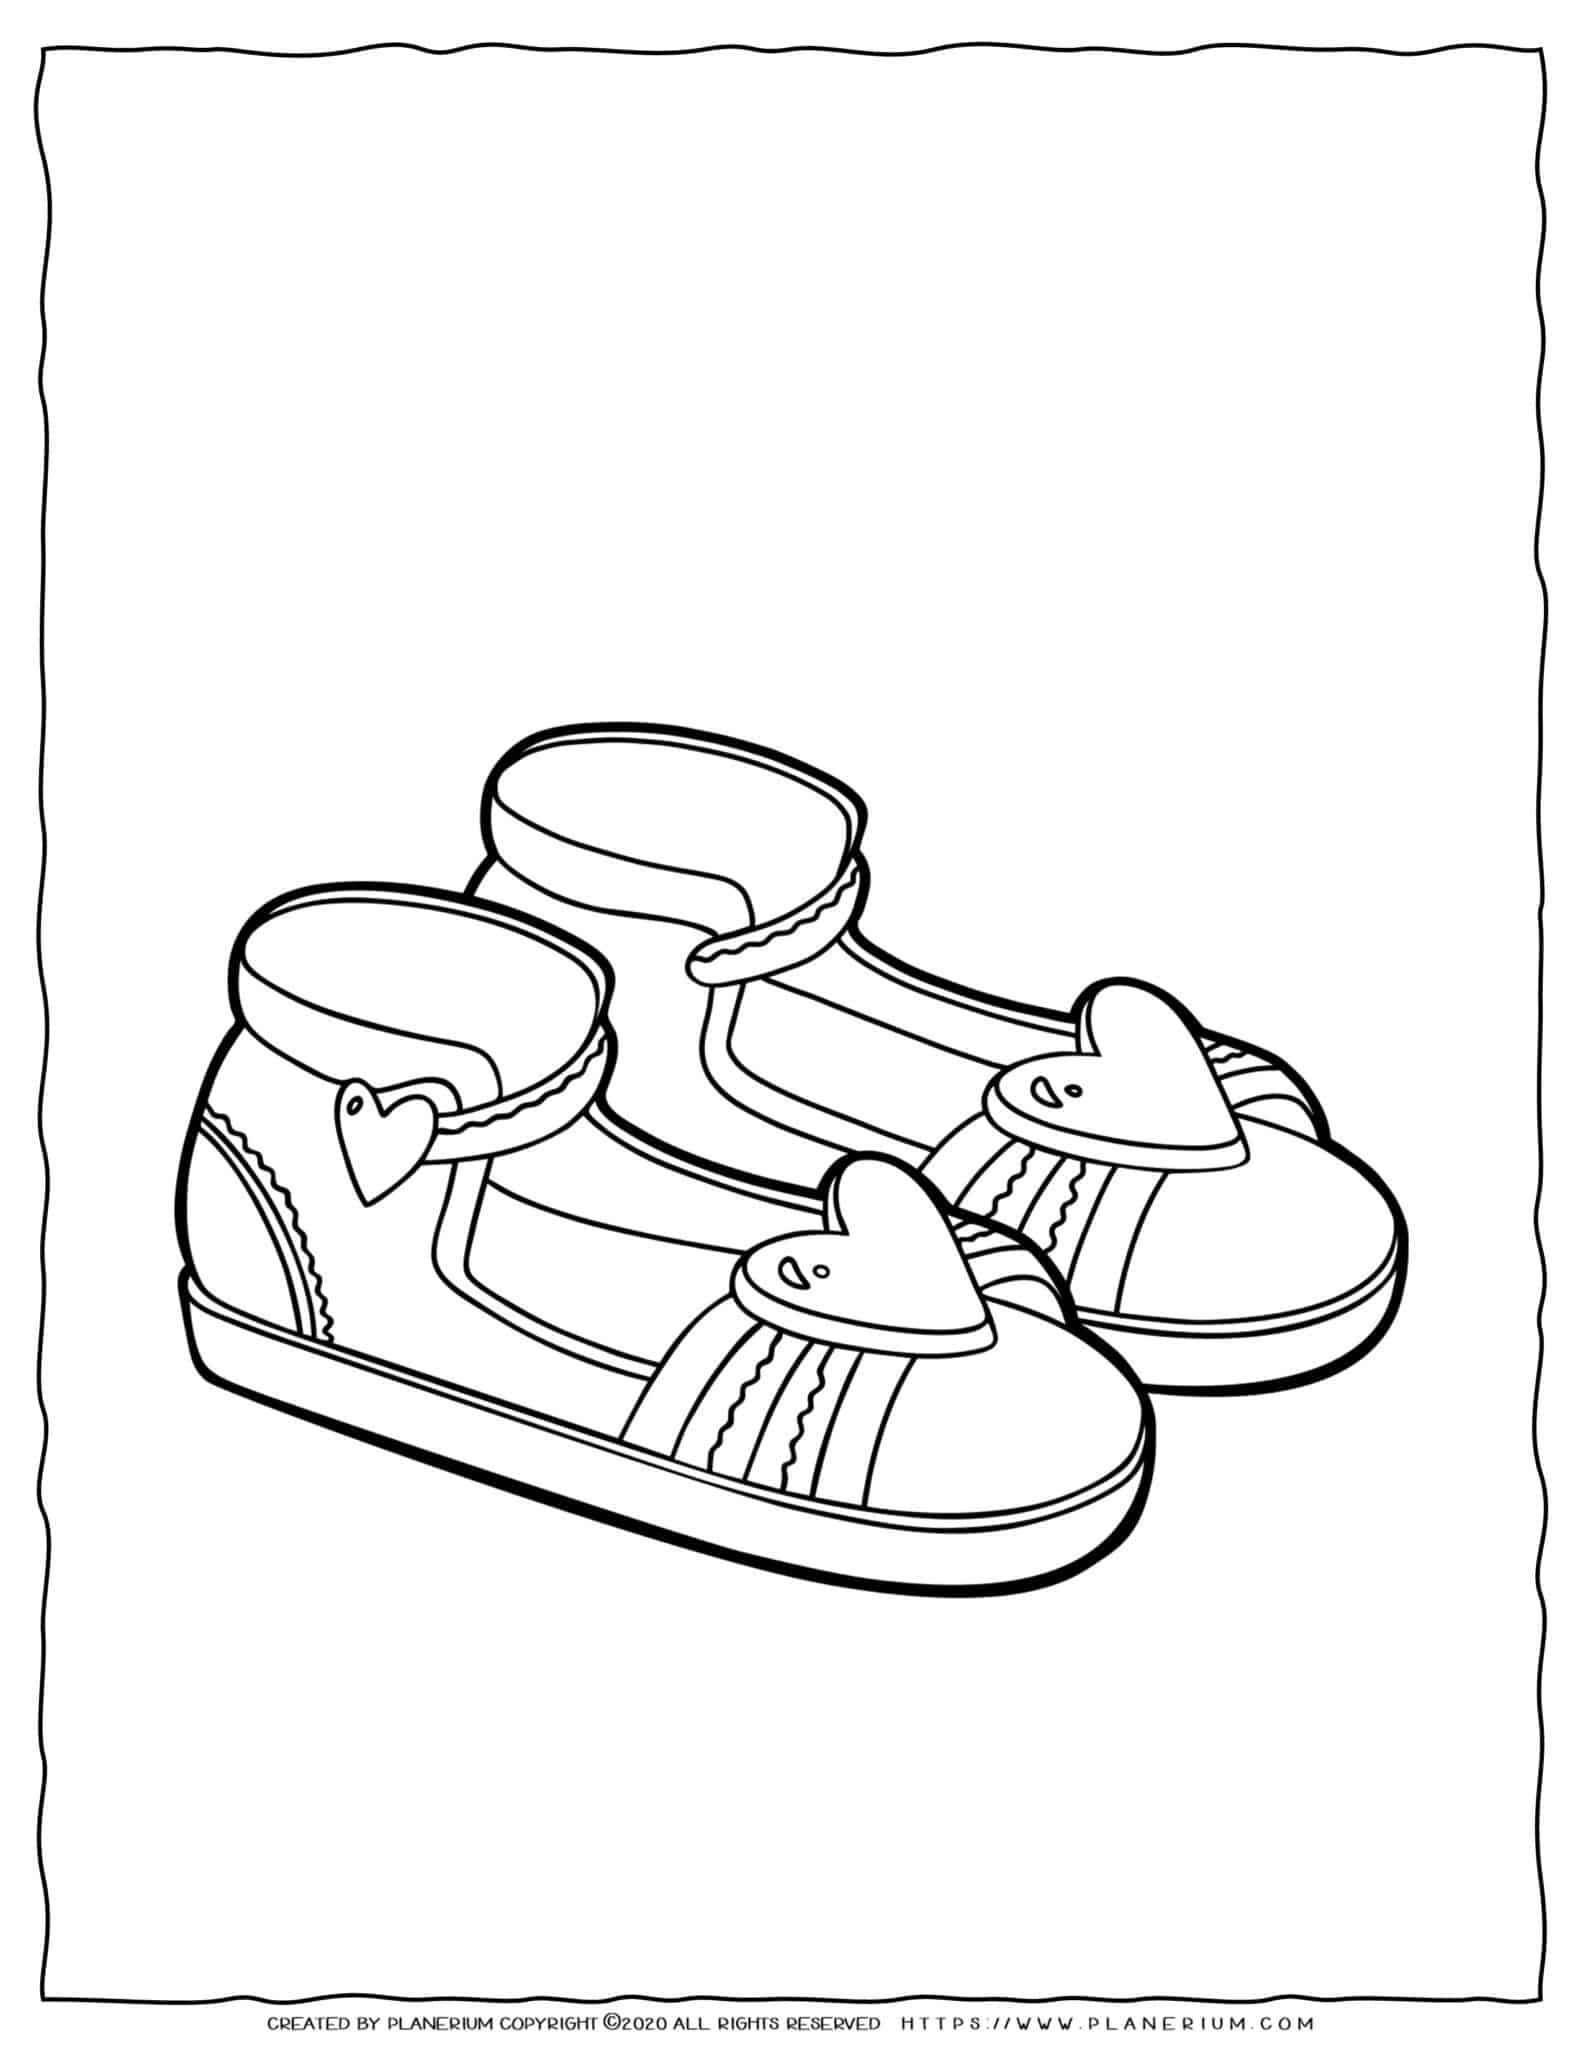 Clothes Coloring Page - Sandals with a ...